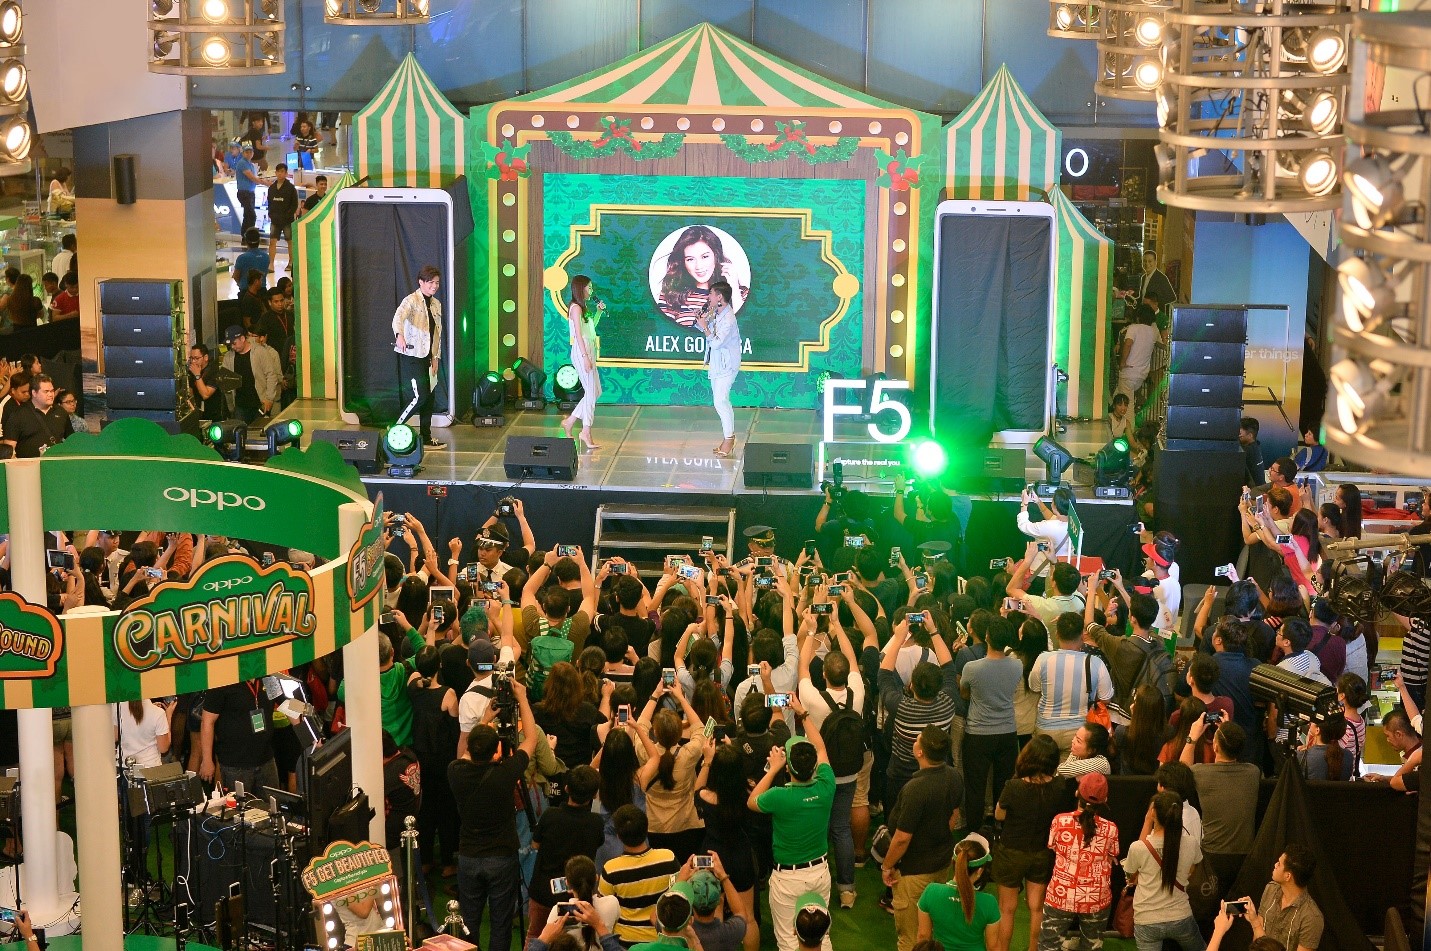 OPPO Kicks off First Day of Sale for the F5 with a Carnival Roadshow!